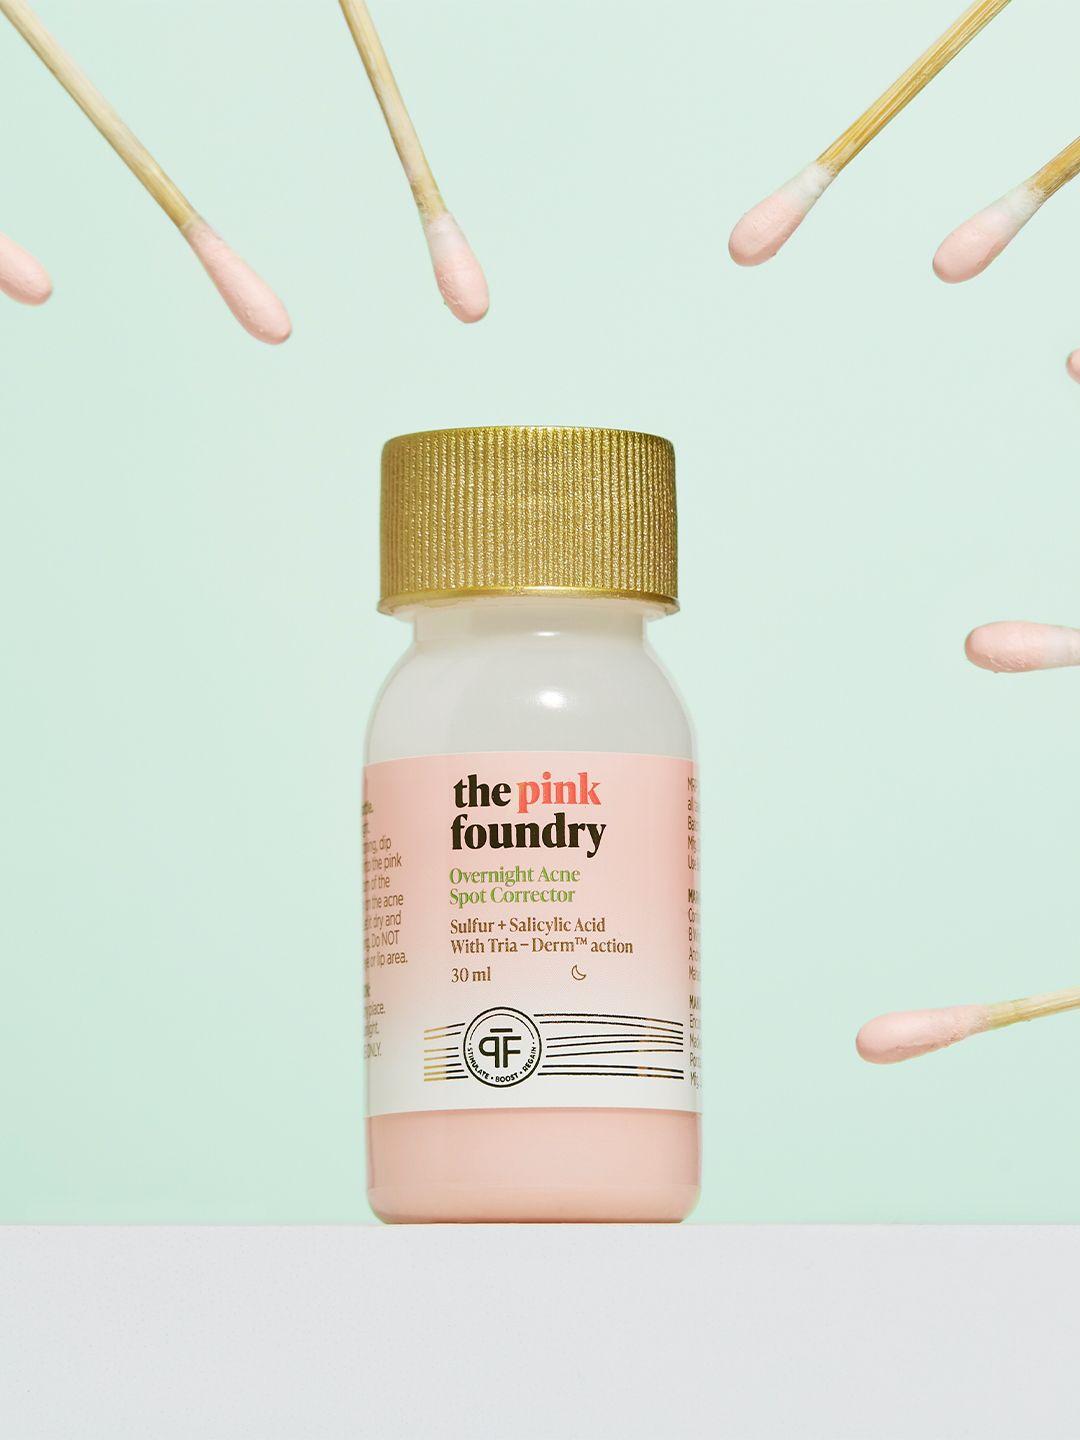 the pink foundry overnight acne spot corrector